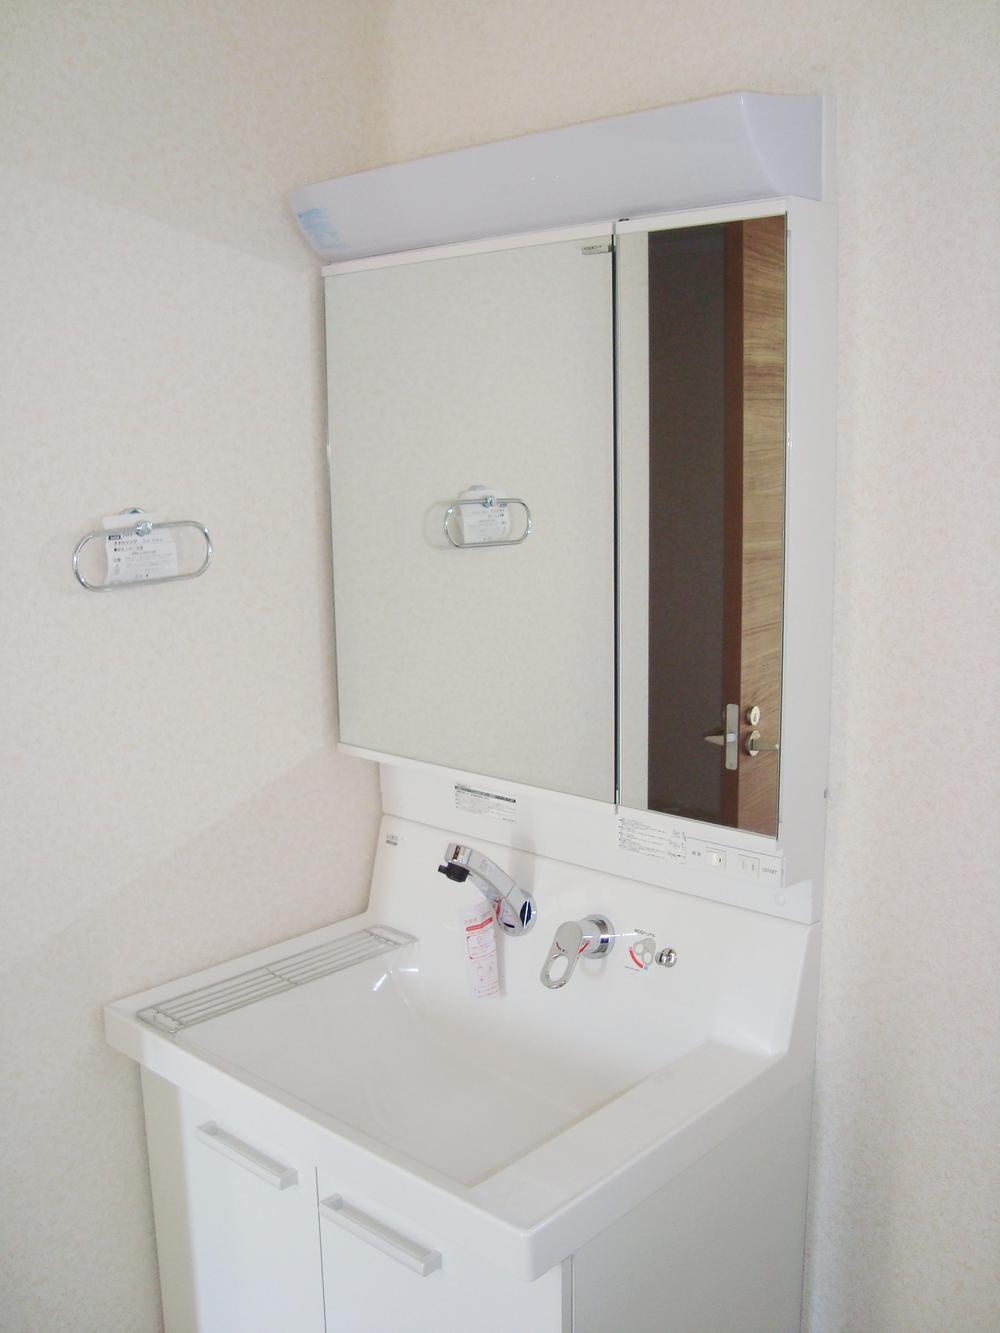 Wash basin, toilet. With convenient hand shower to wash basin of wide sink